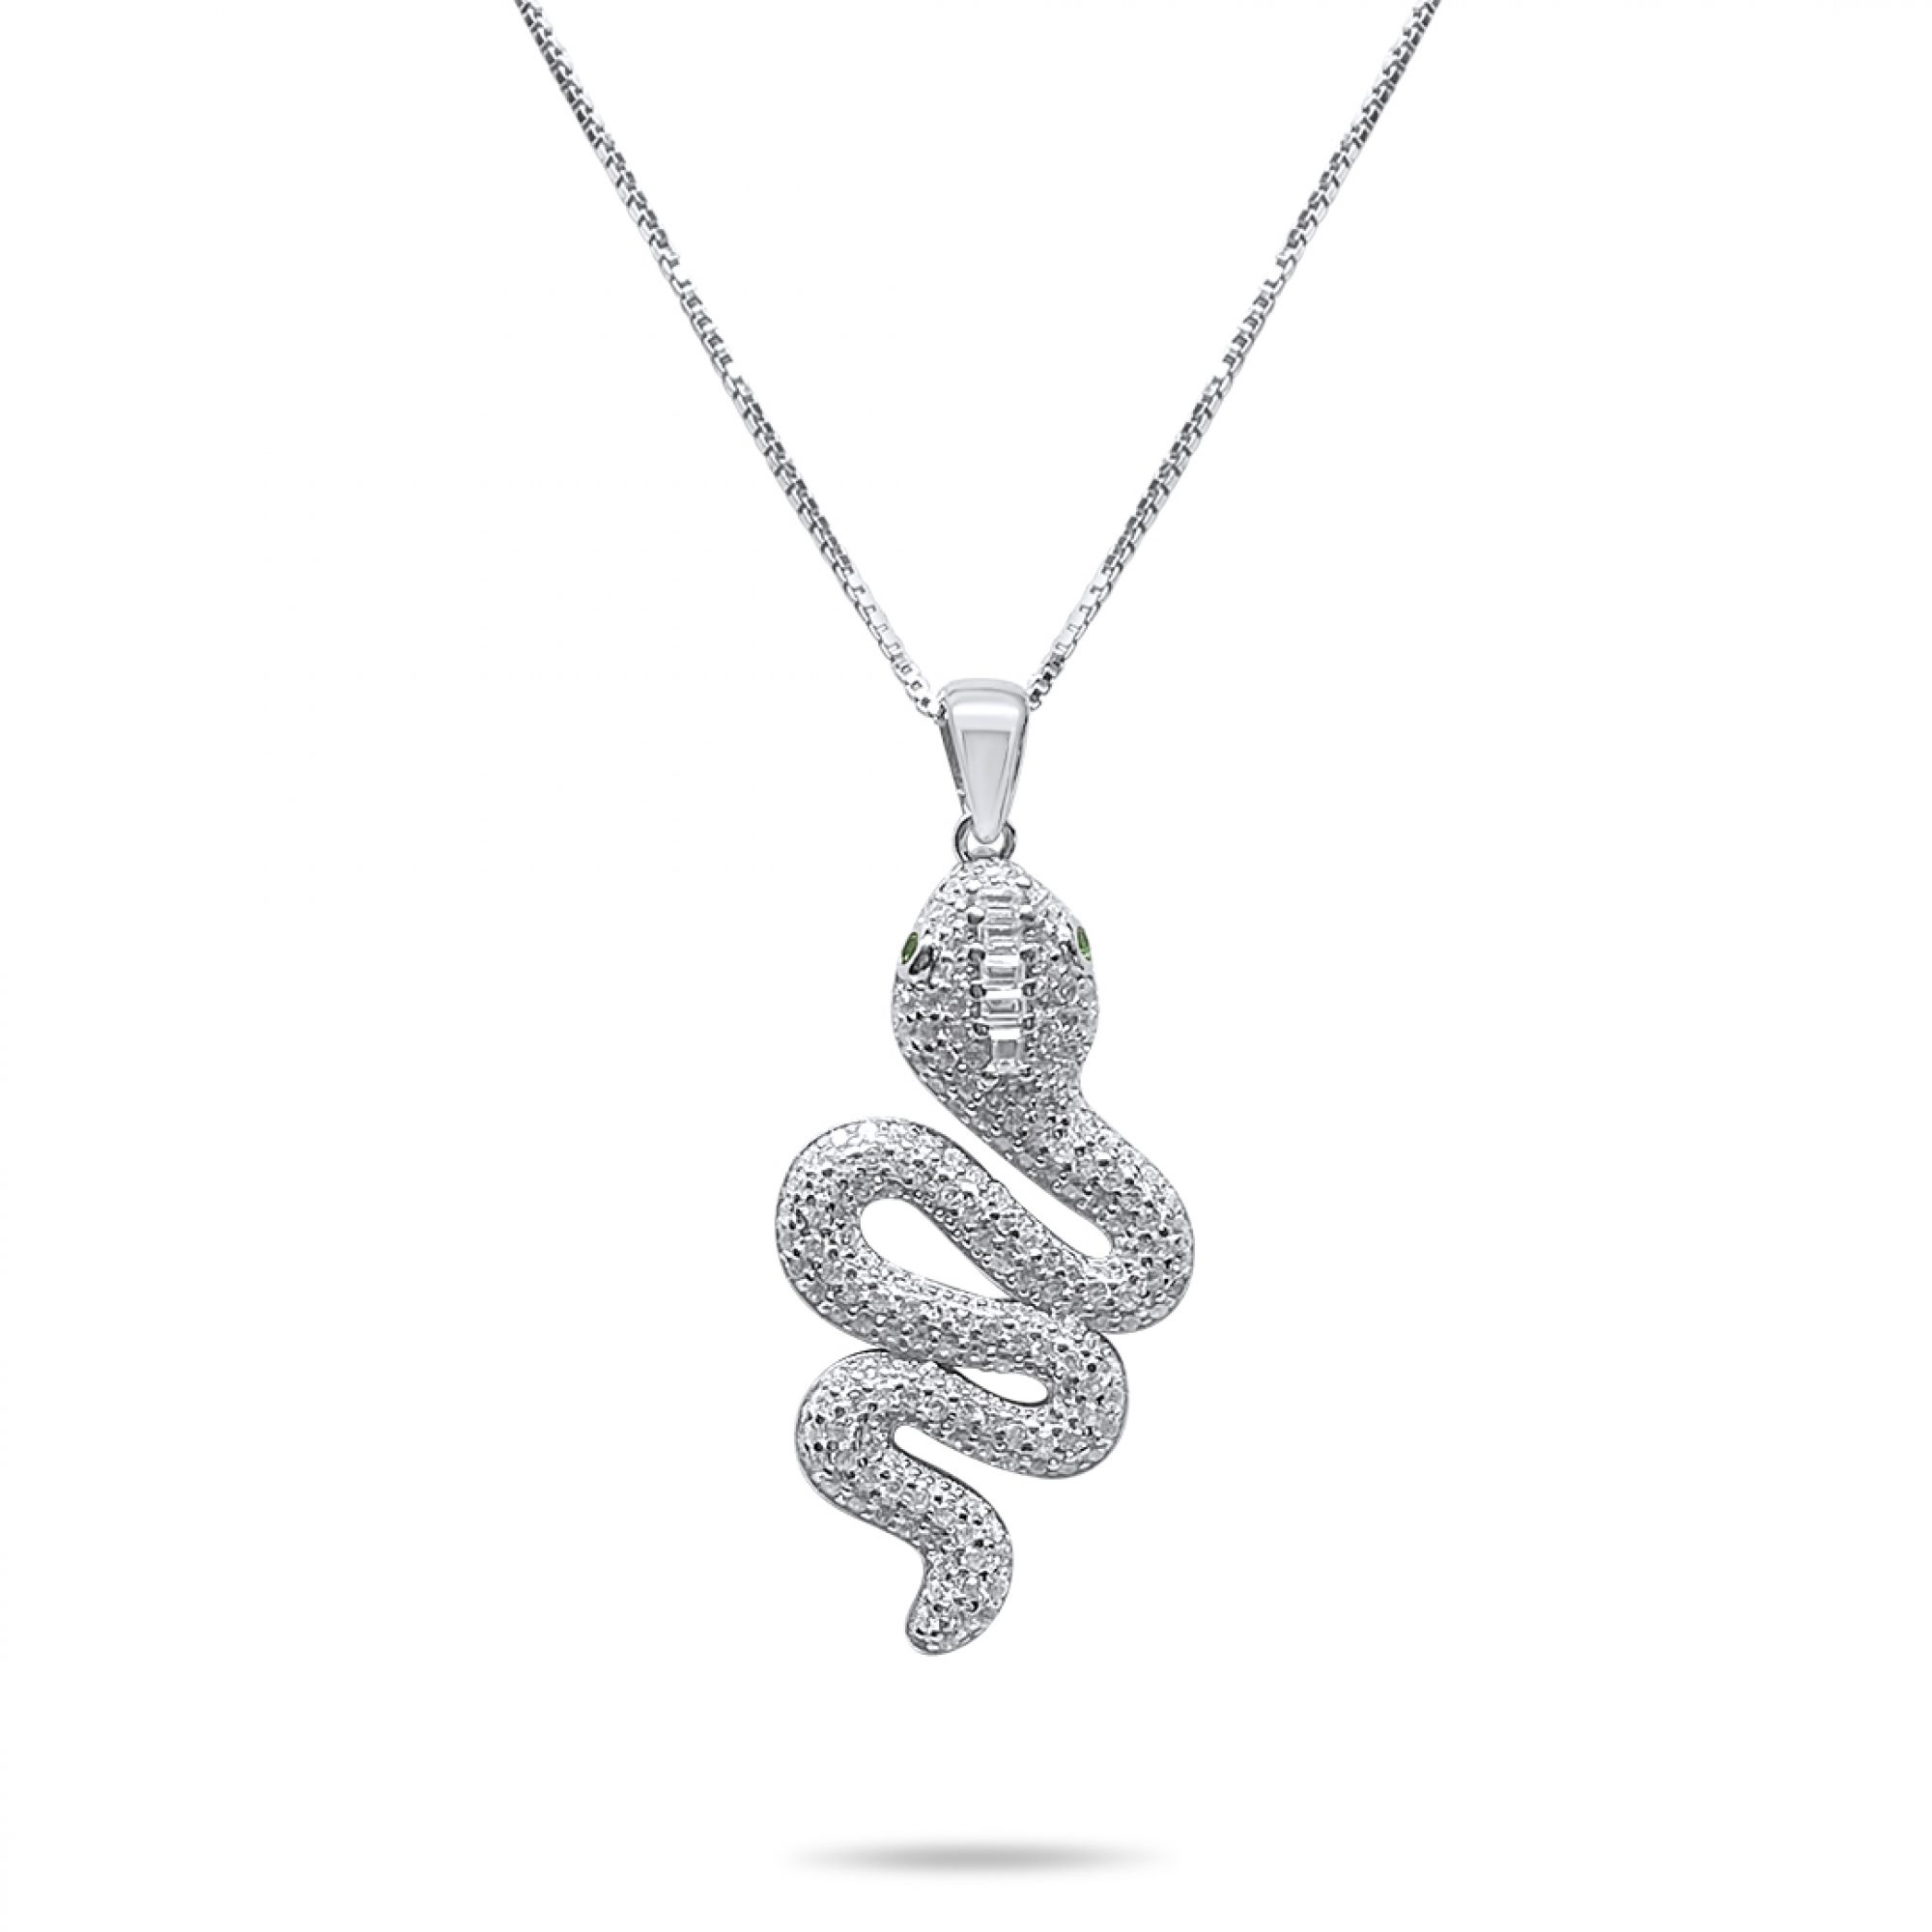 Snake necklace with zircon stones